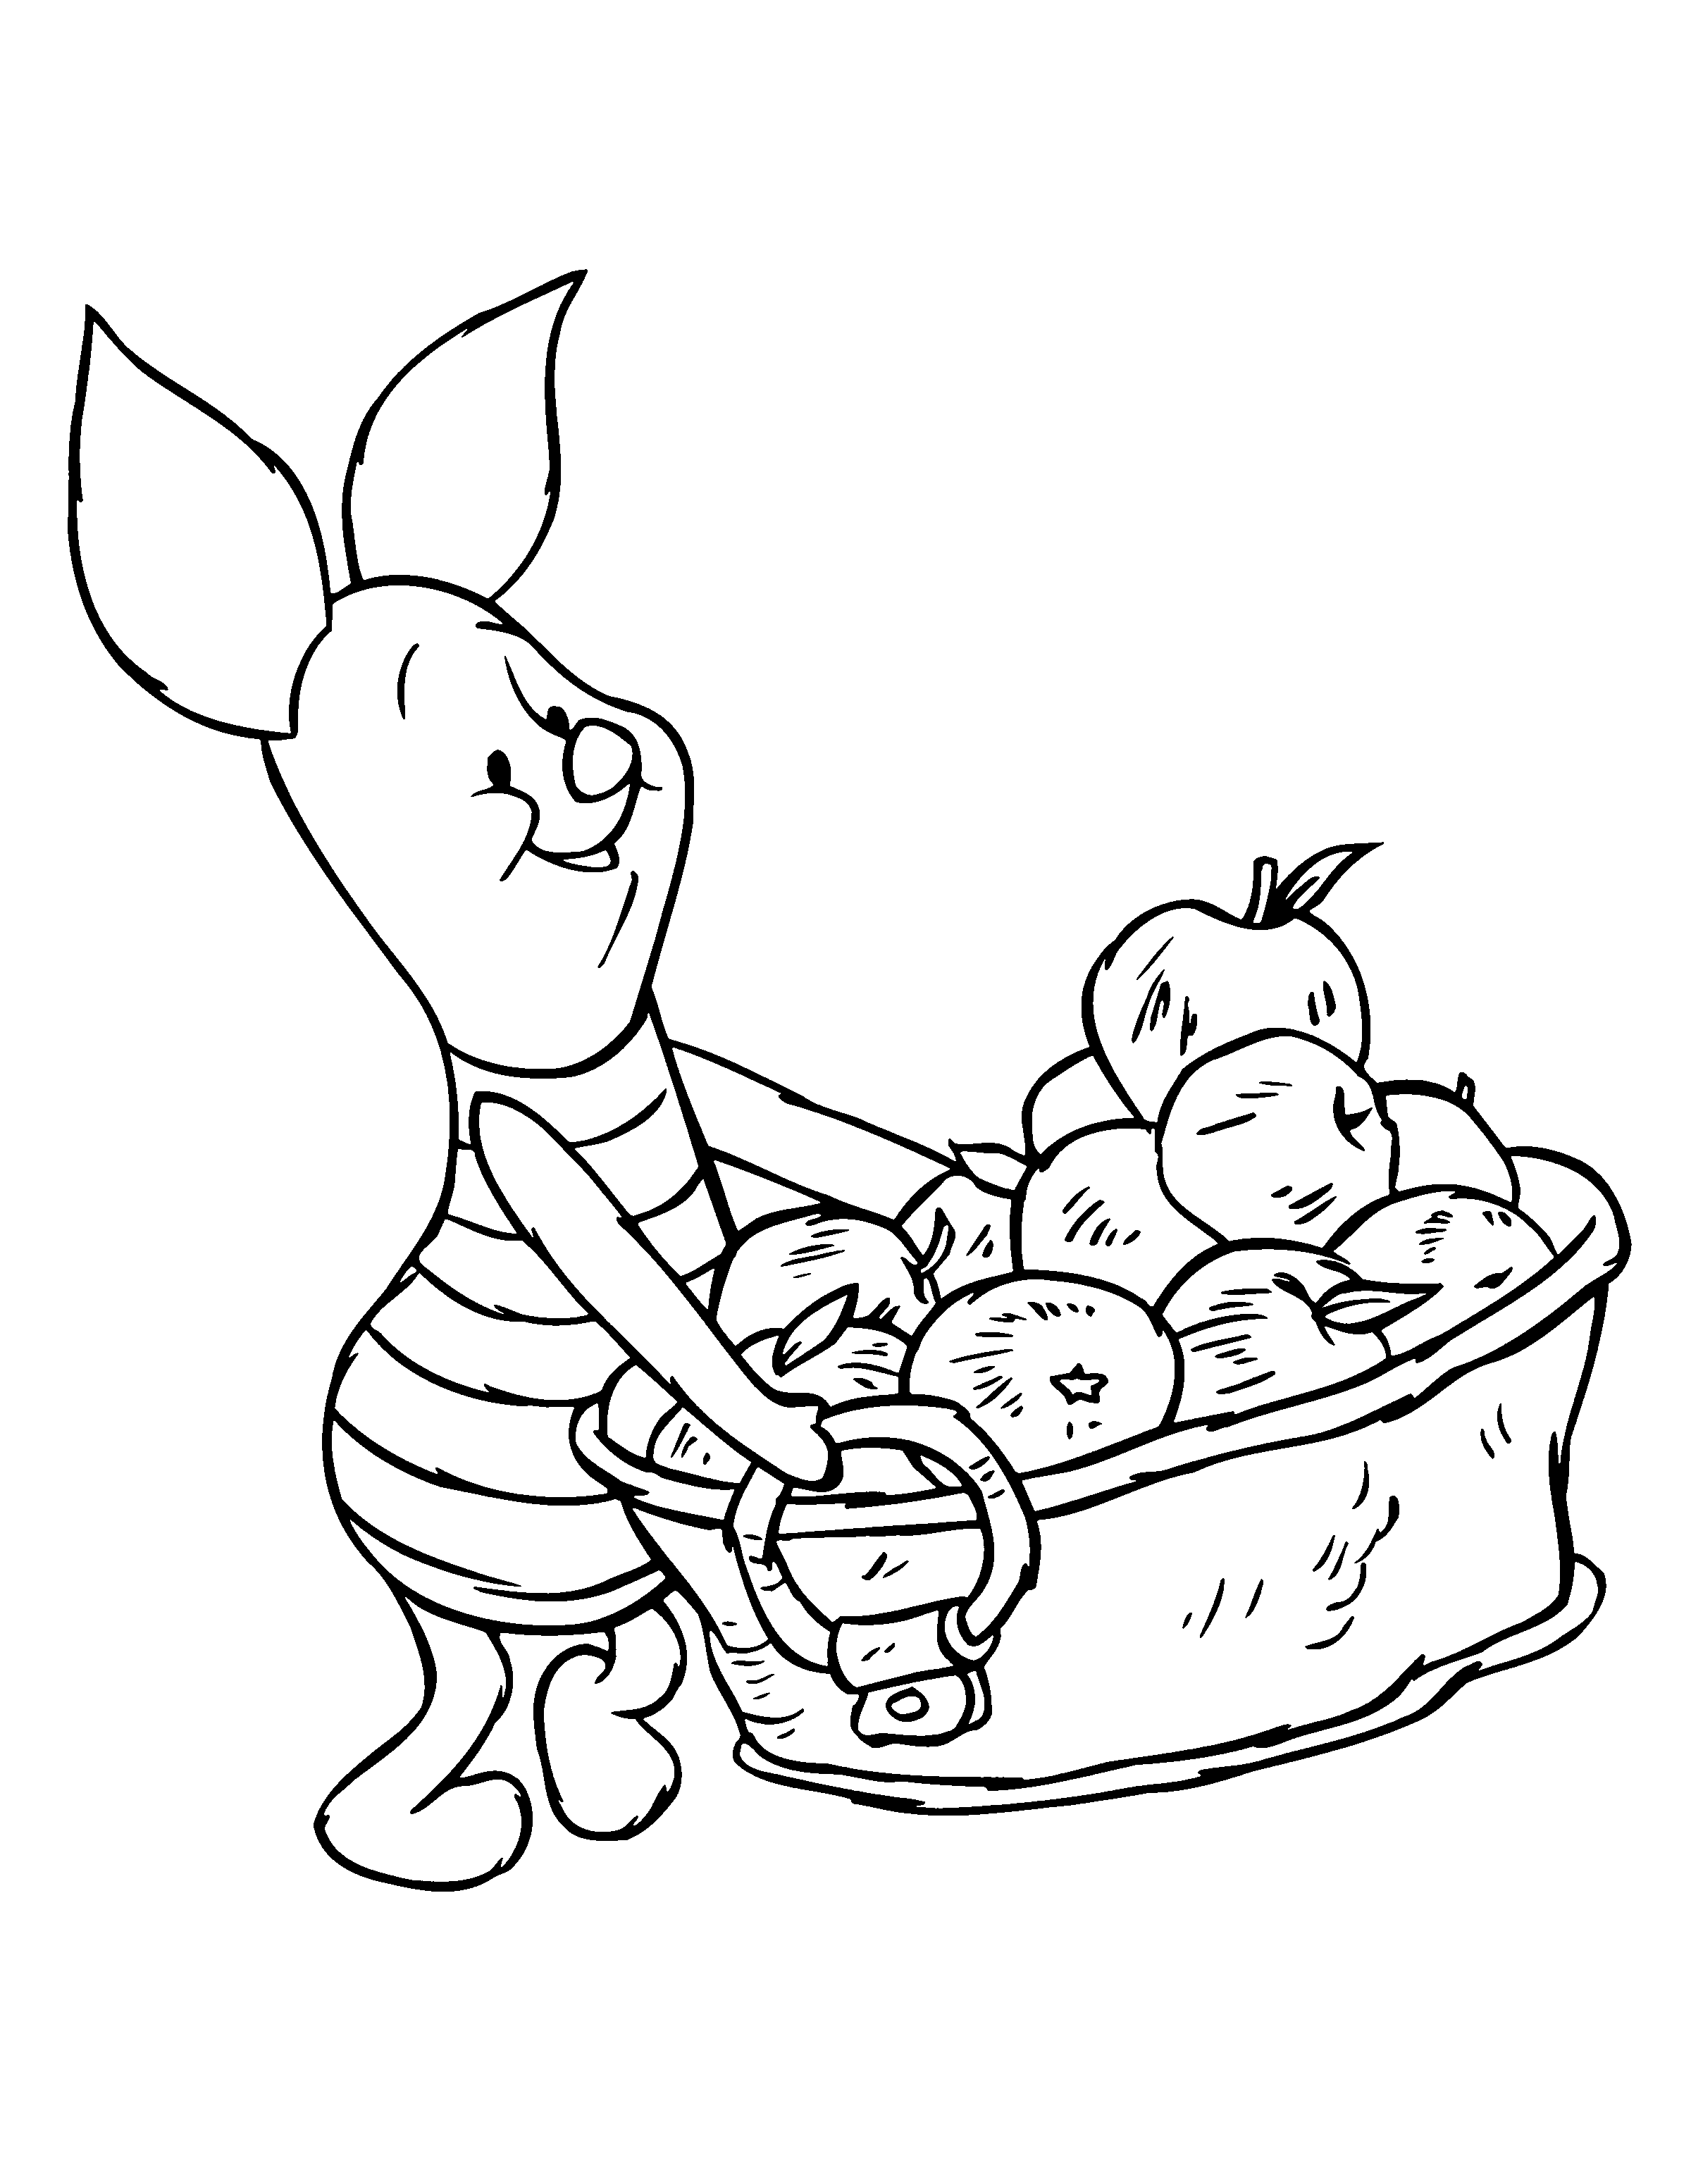 animated-coloring-pages-winnie-the-pooh-image-0071